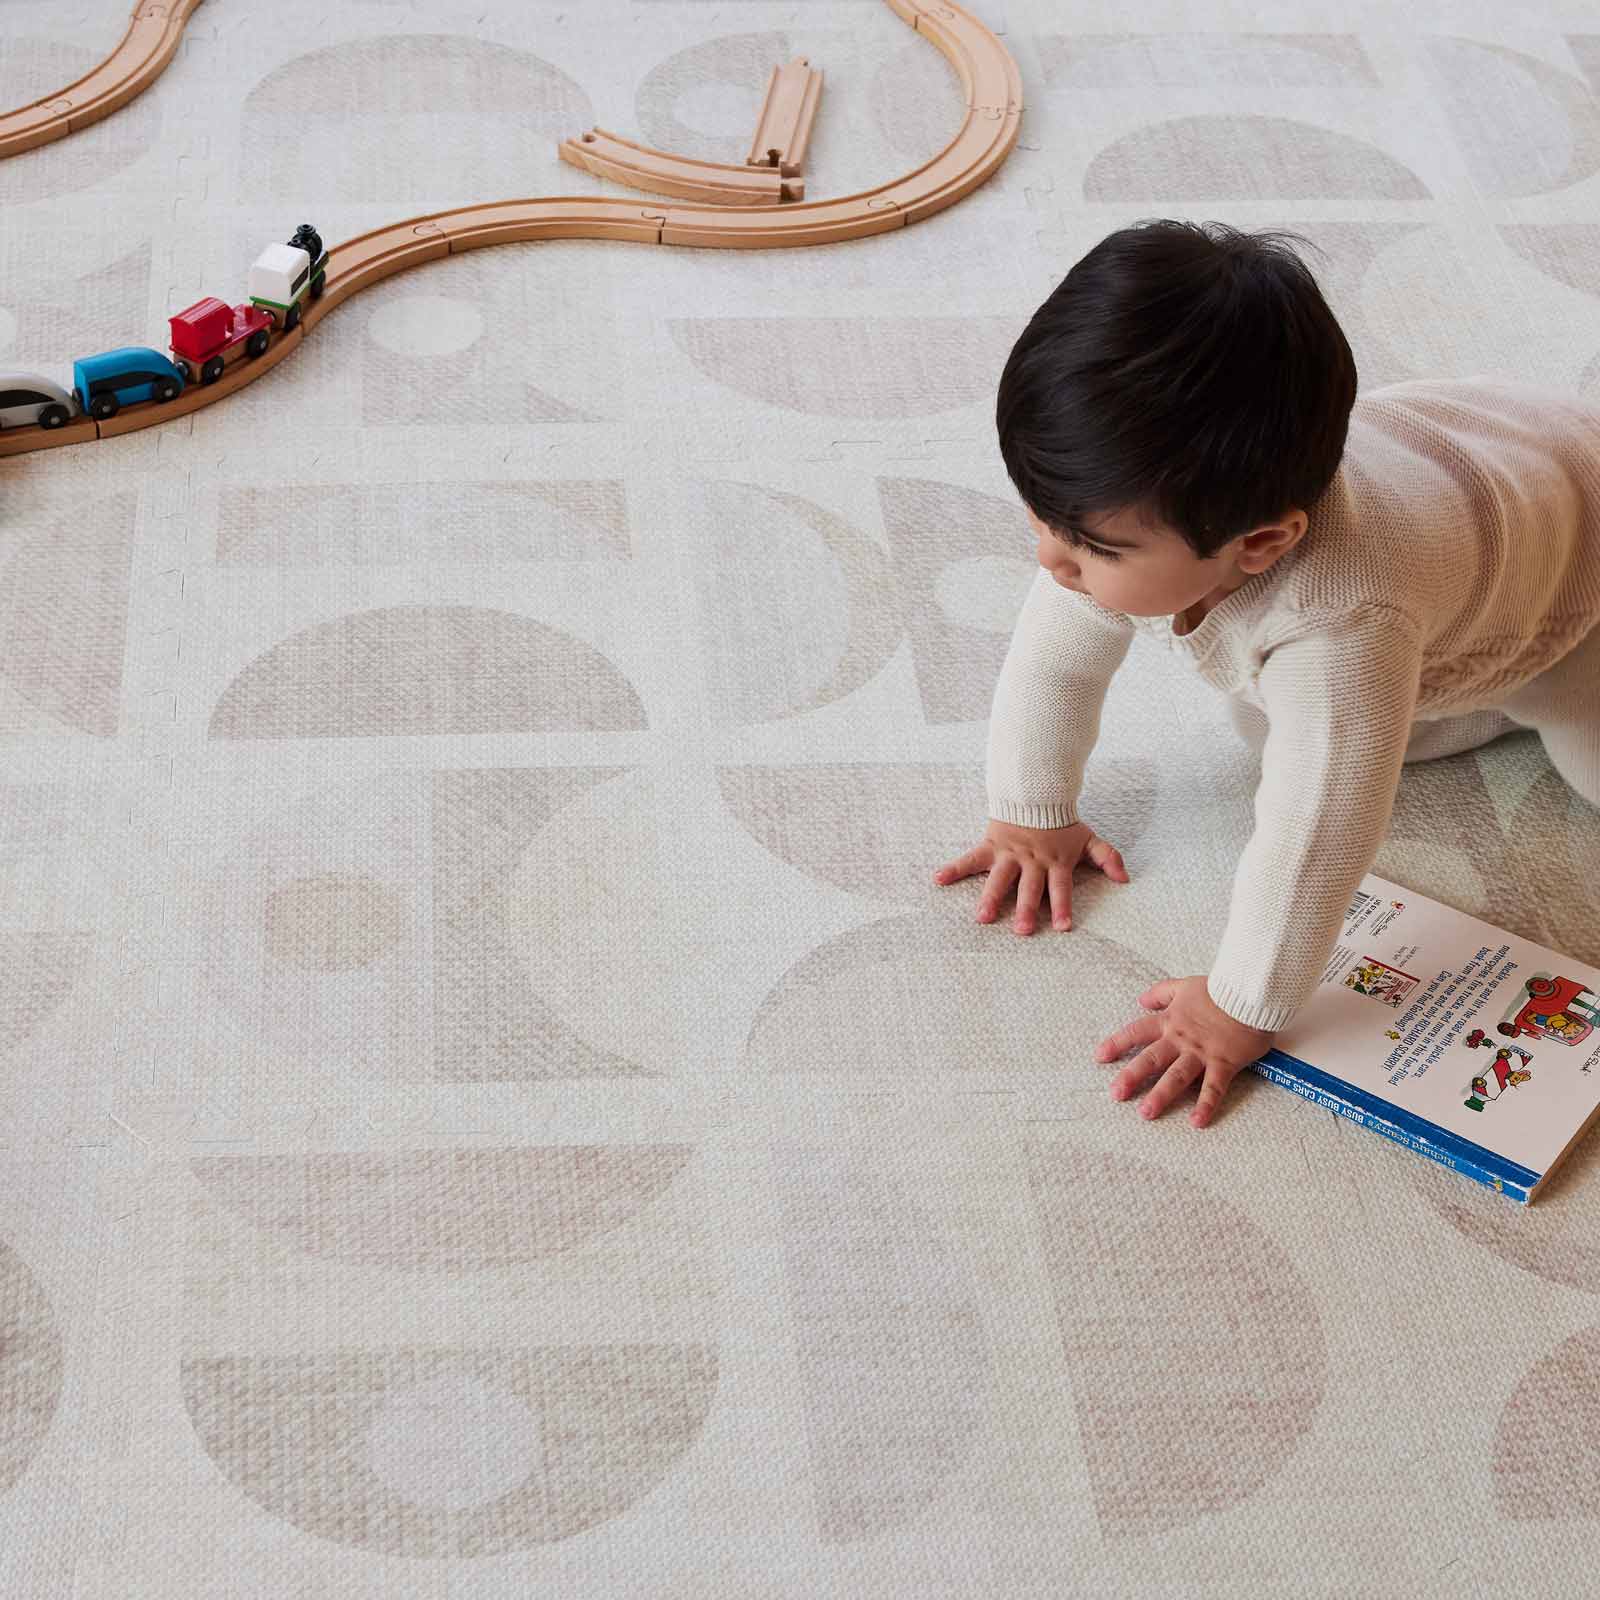 Luna sandstone neutral geographic print play mat with baby boy crawling over a book on the mat with a wooden train track in the corner of the mat